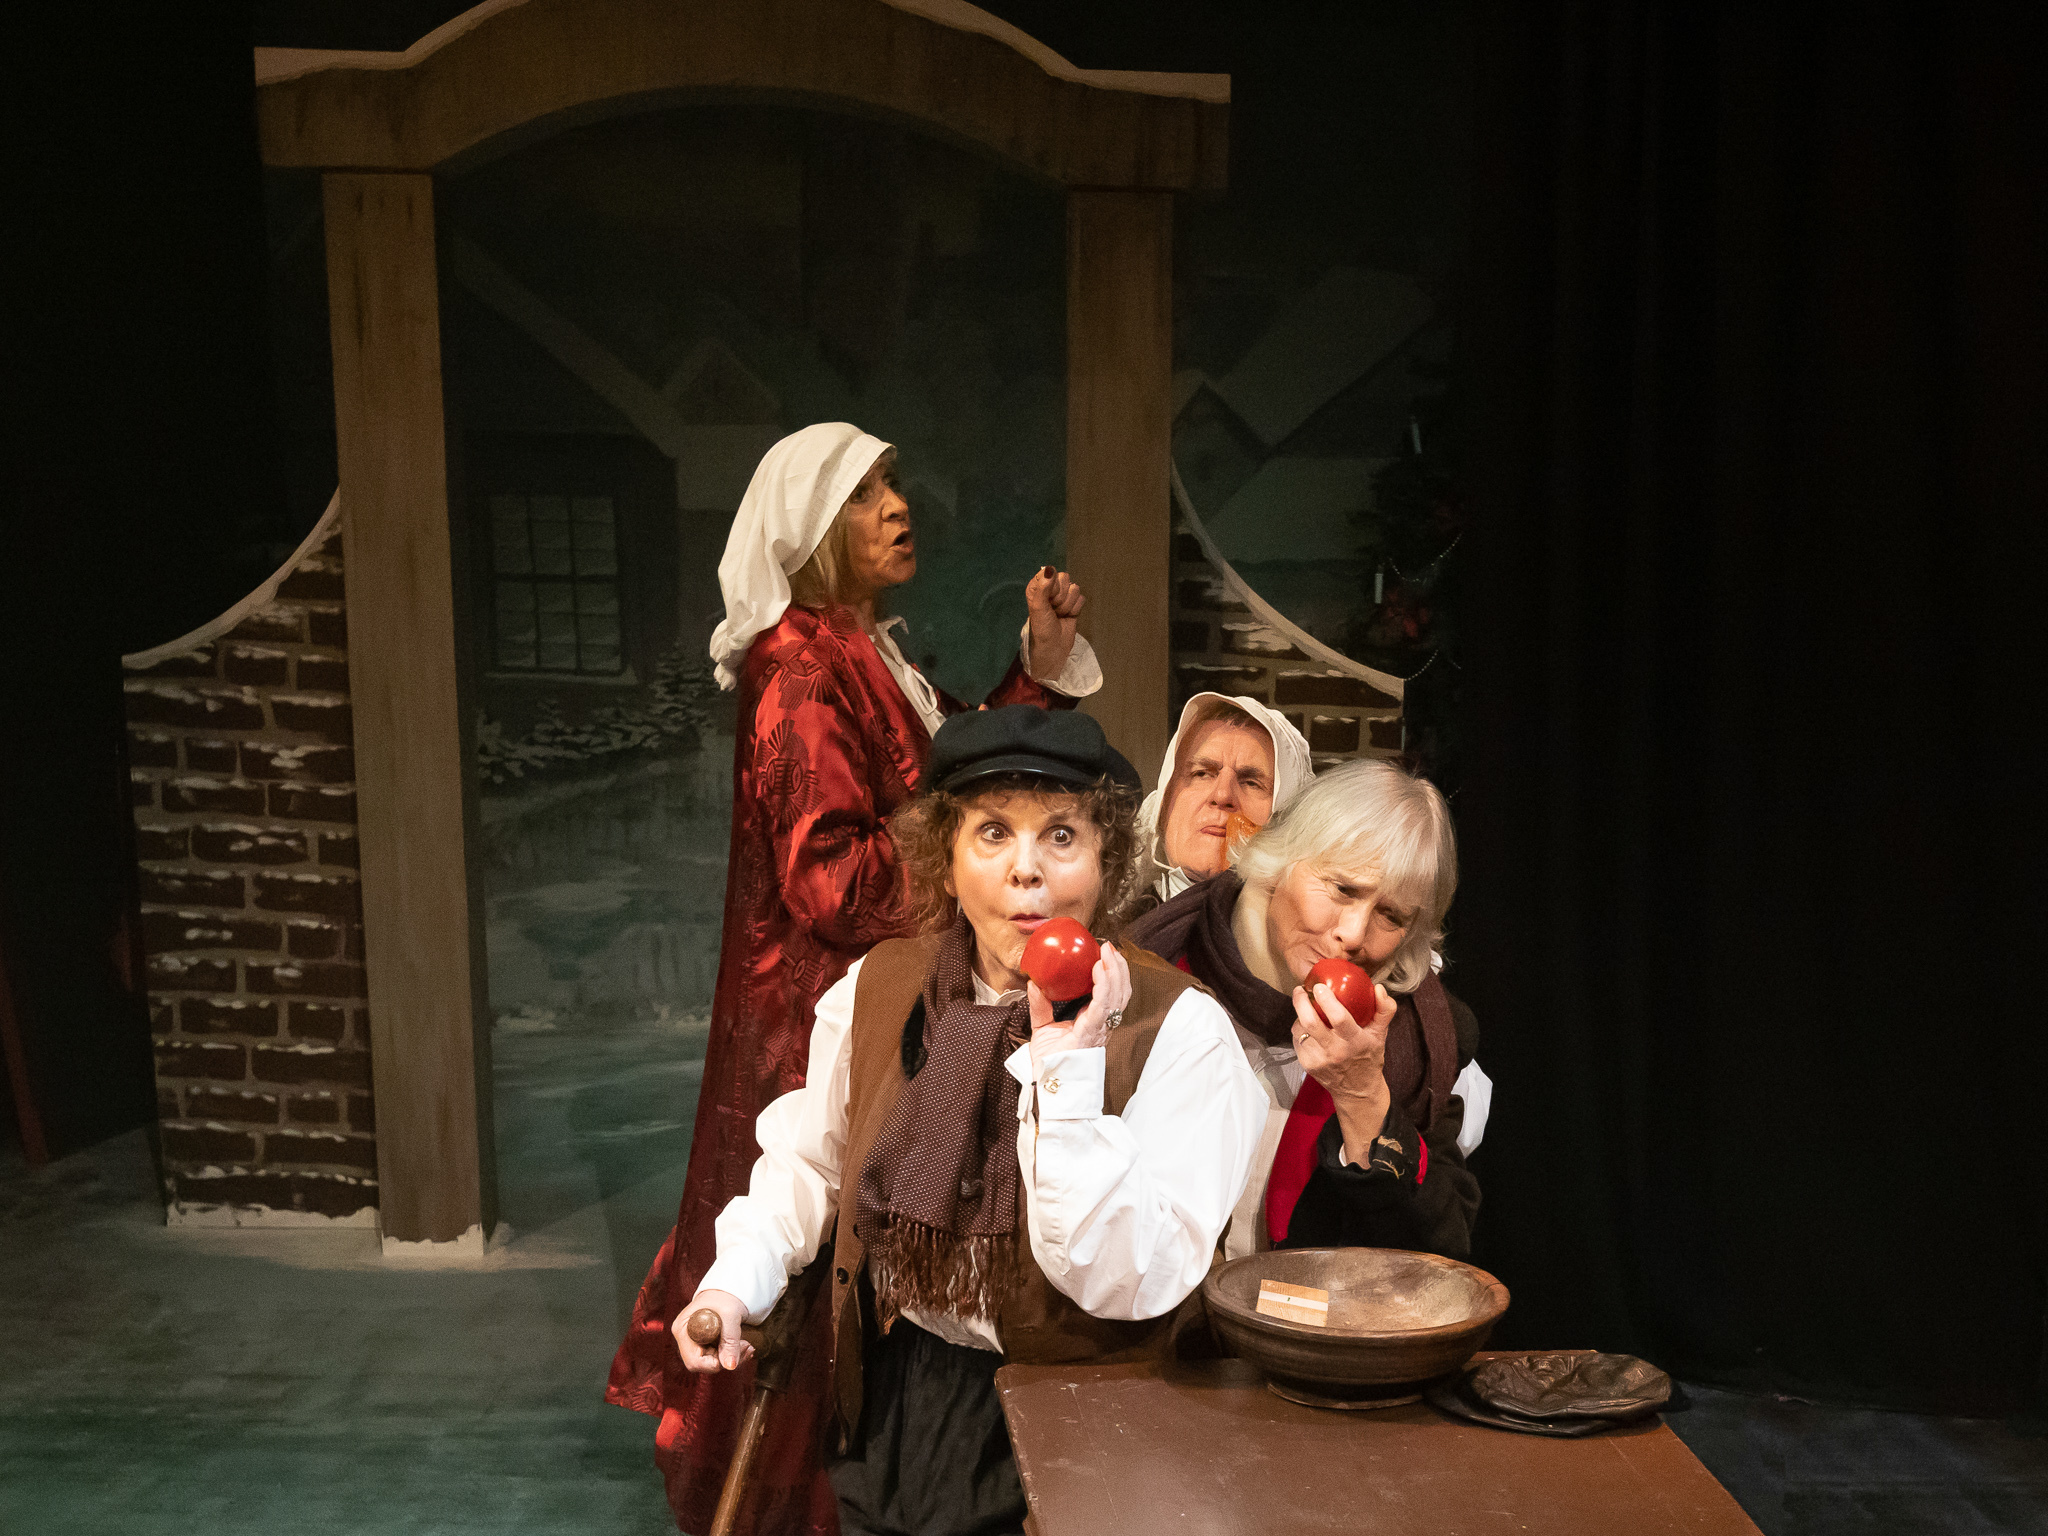 A performance of A Christmas Carol from the Farndale group at the Millgate Arts Centre this week (Image: Facebook).